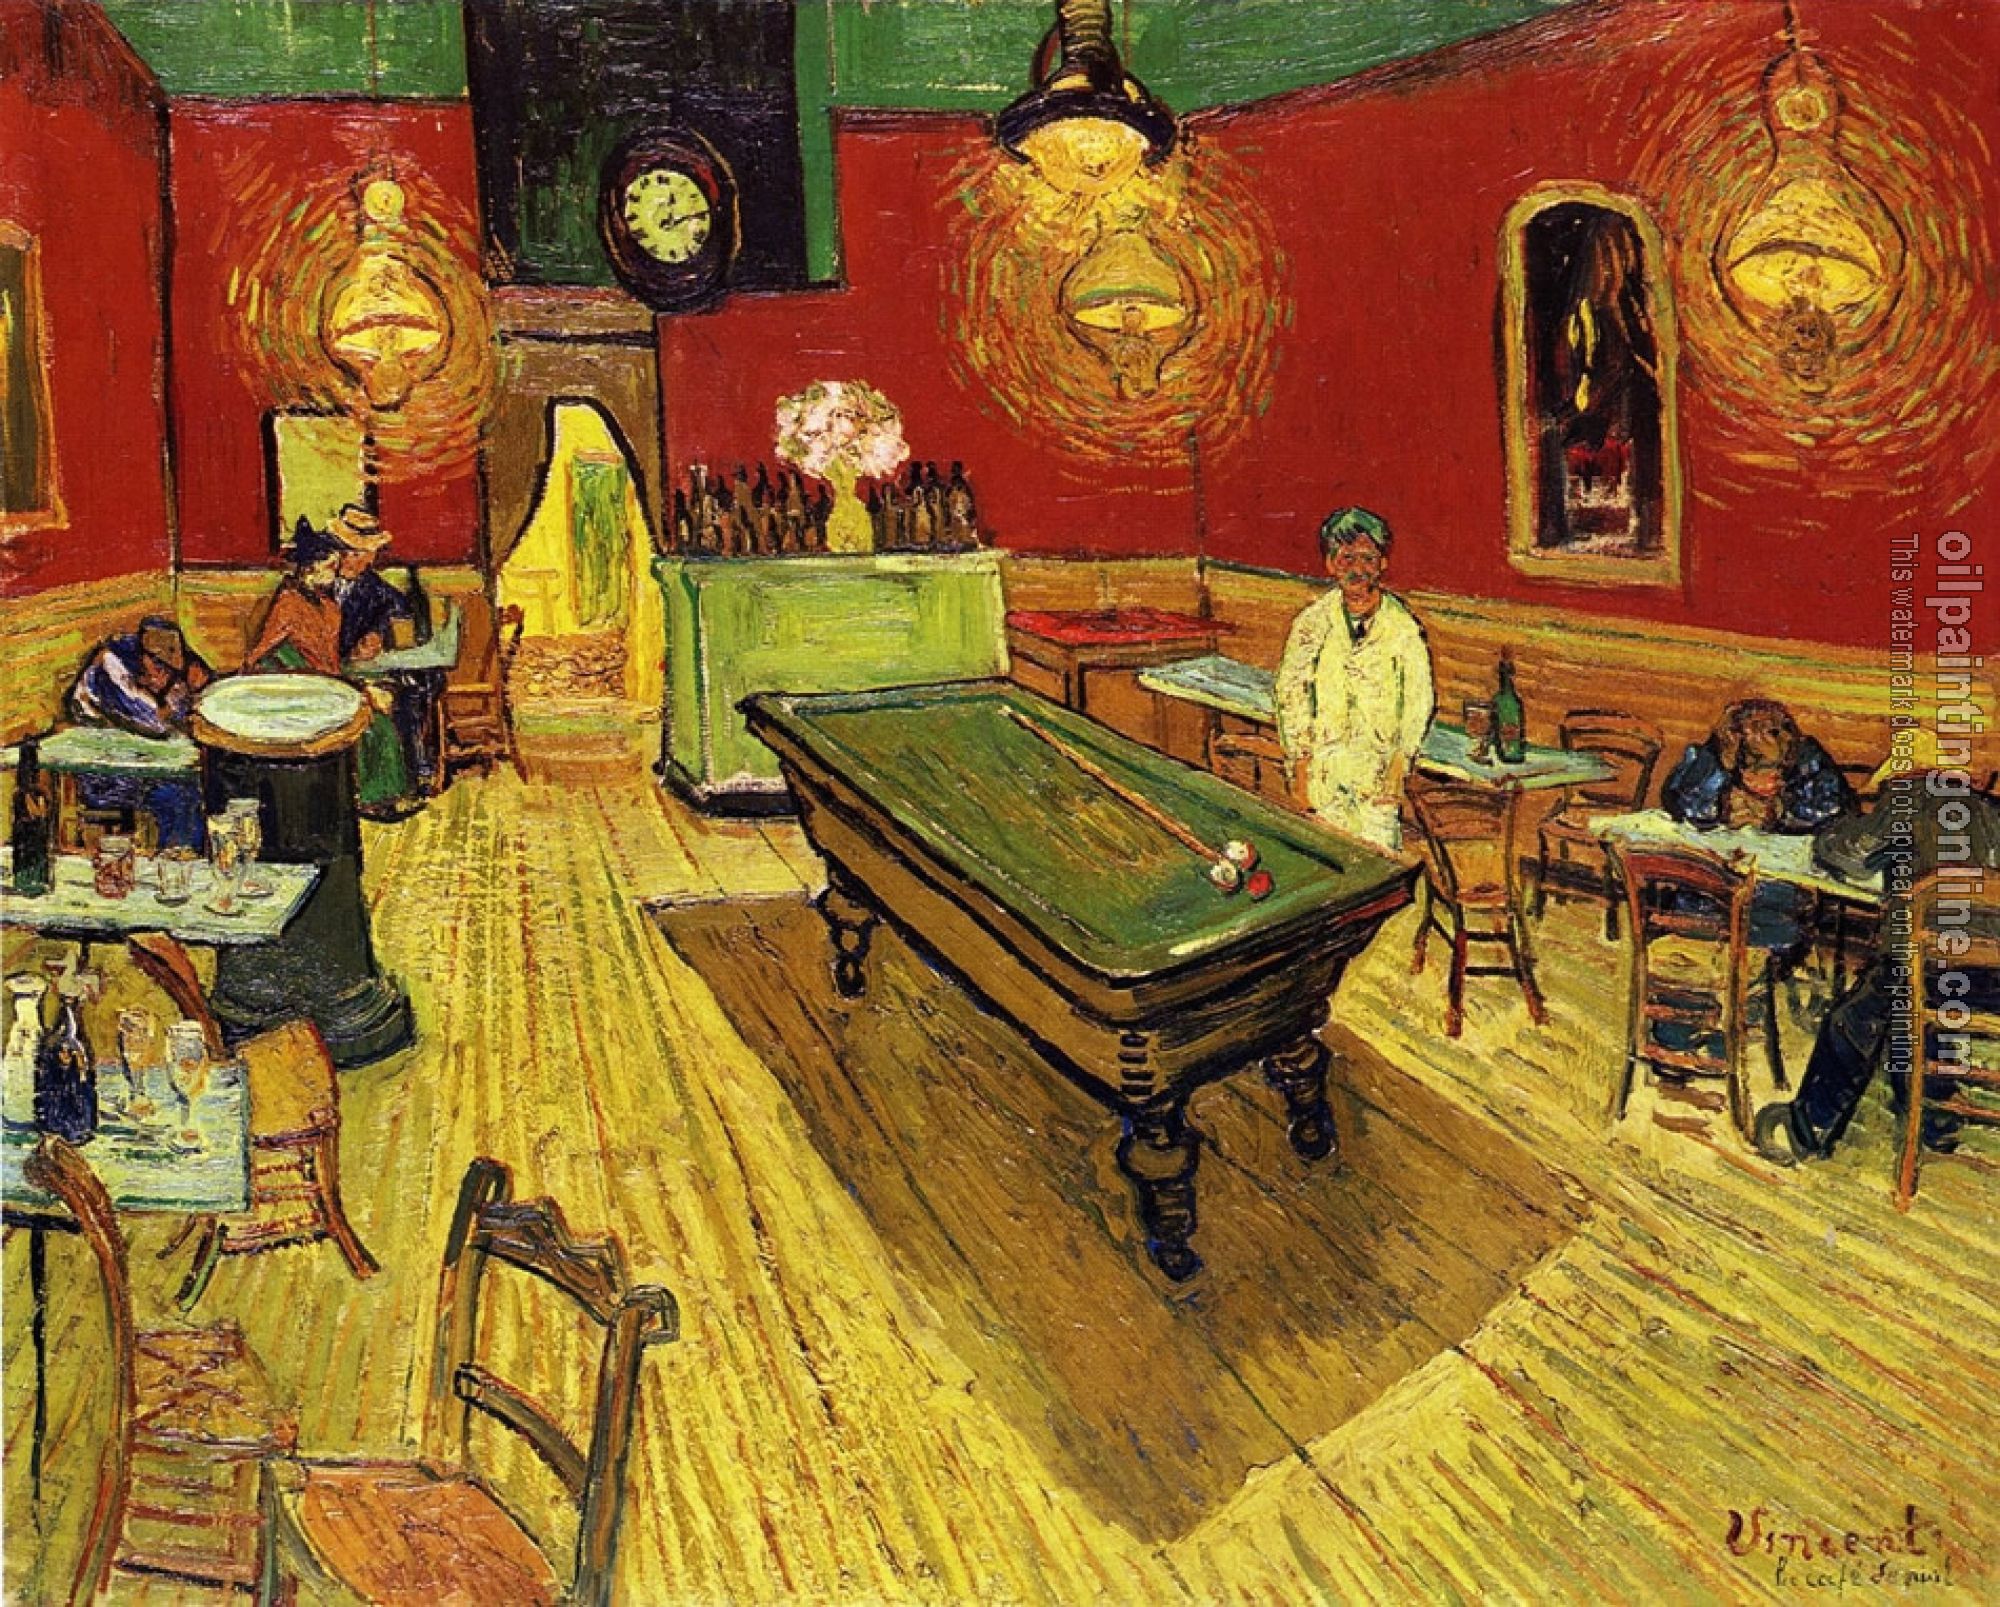 Gogh, Vincent van - The Night Cafe in the Place Lamartine in Arles